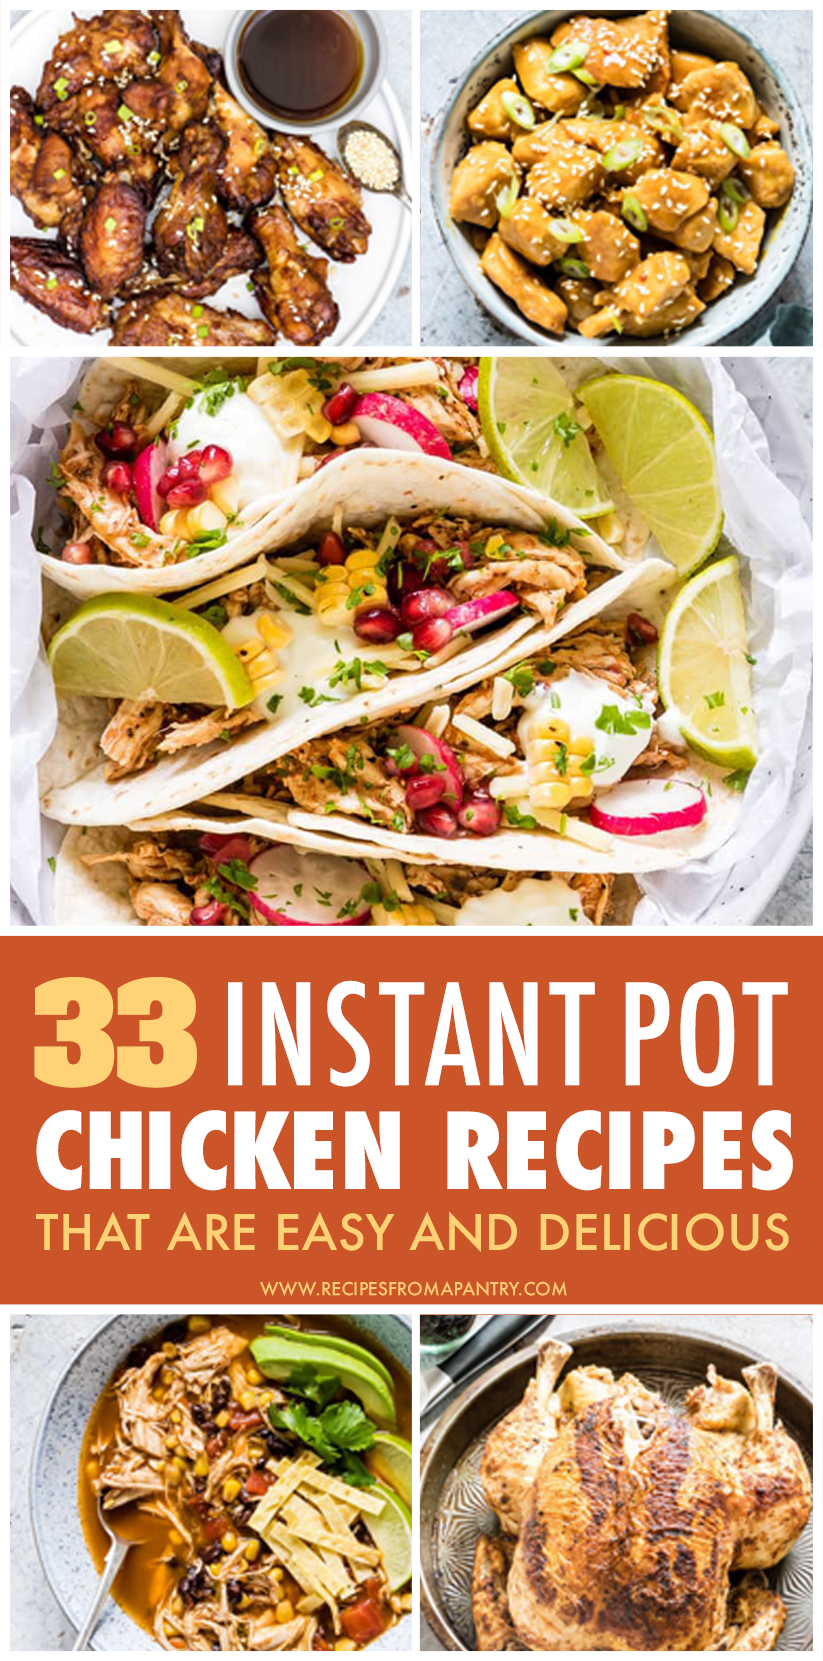 36 Of The Best Instant Pot Chicken Recipes - Recipes From A Pantry